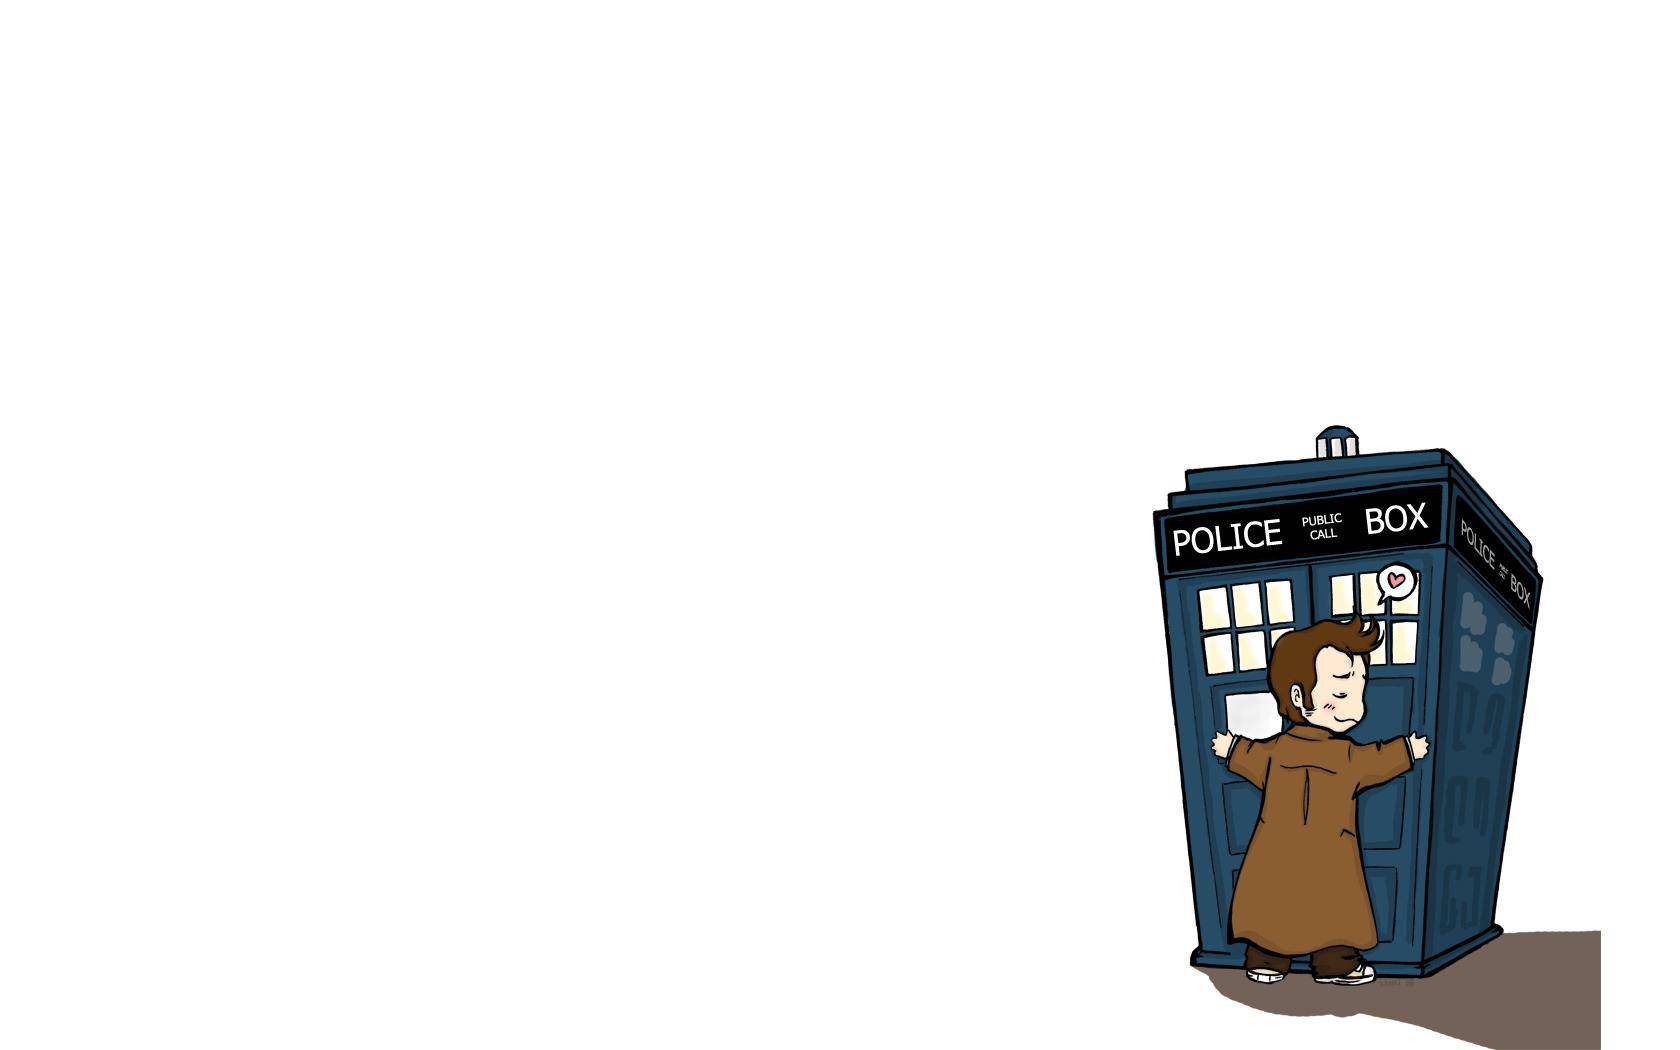 Tardis doctor who wallpaper [6] - (#21067) - High Quality and ...